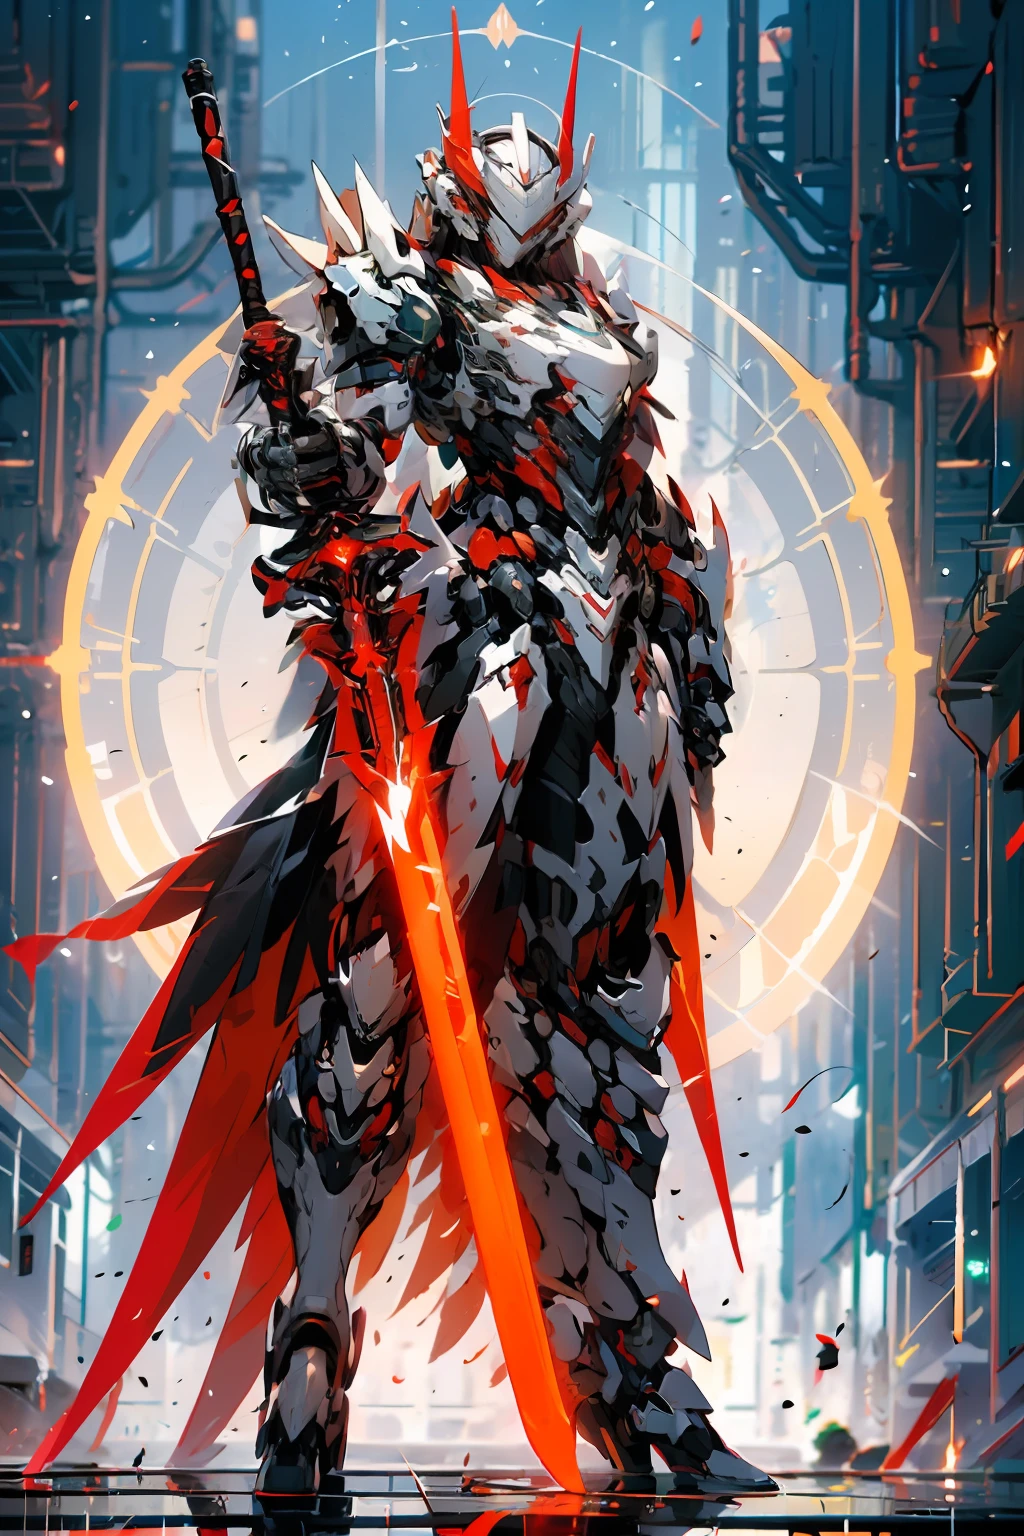 mecha_musume, 1 girl, long_hair, science_fiction, weapon, lightsaber, holding_sword, res_eyes, solo, headdress, holding_weapon, mecha, bust, red and black livery, angel halo, sad gaze, upper body, mermaid line, robot with red flames and black body holding red flames sword